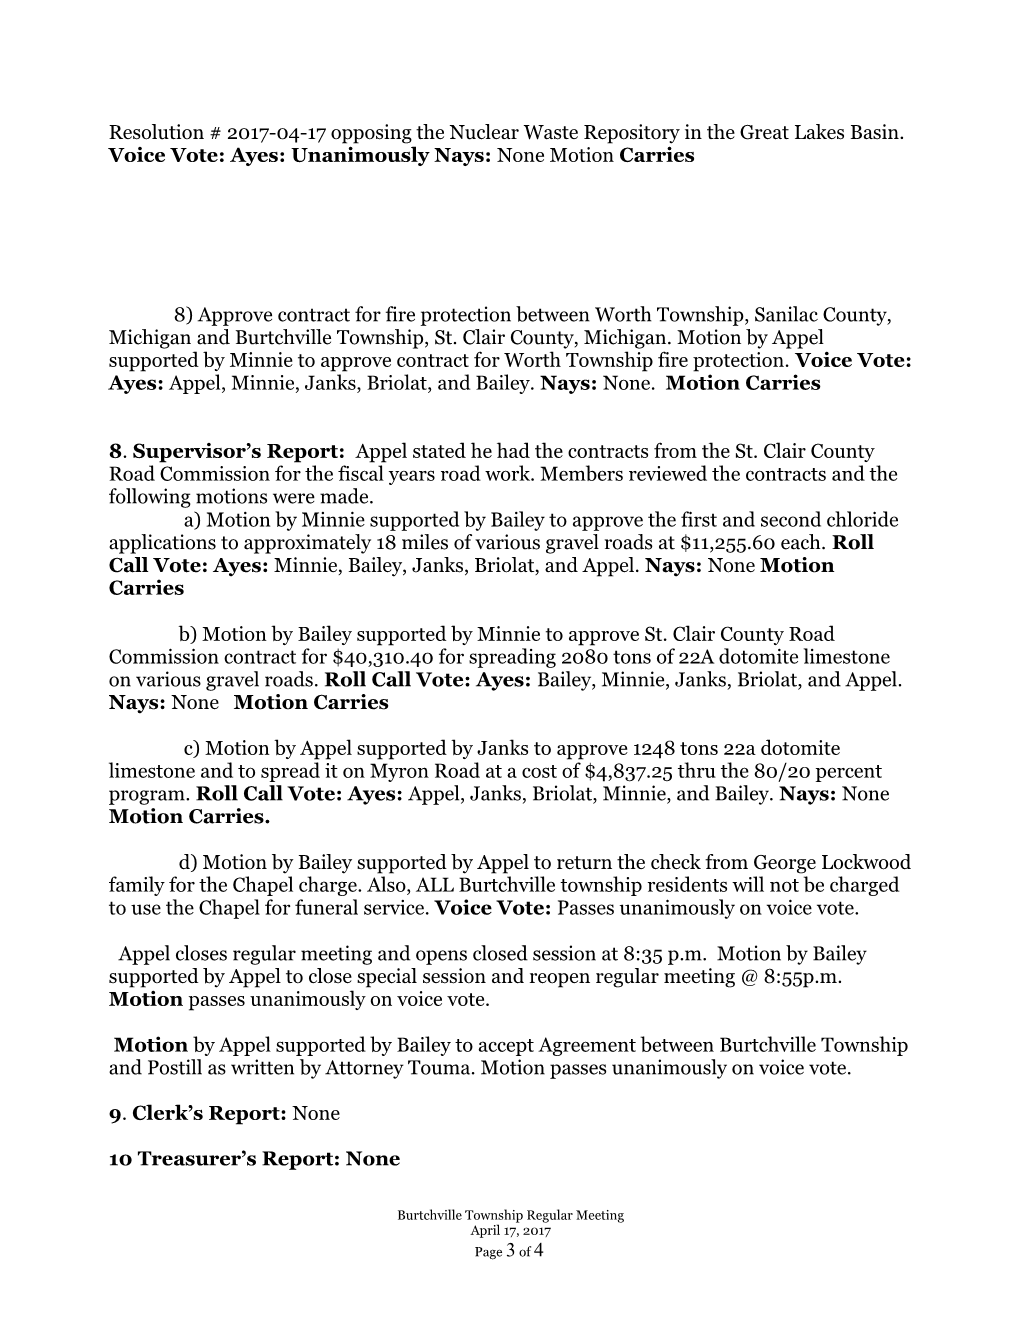 Burtchville Township Board of Trustees